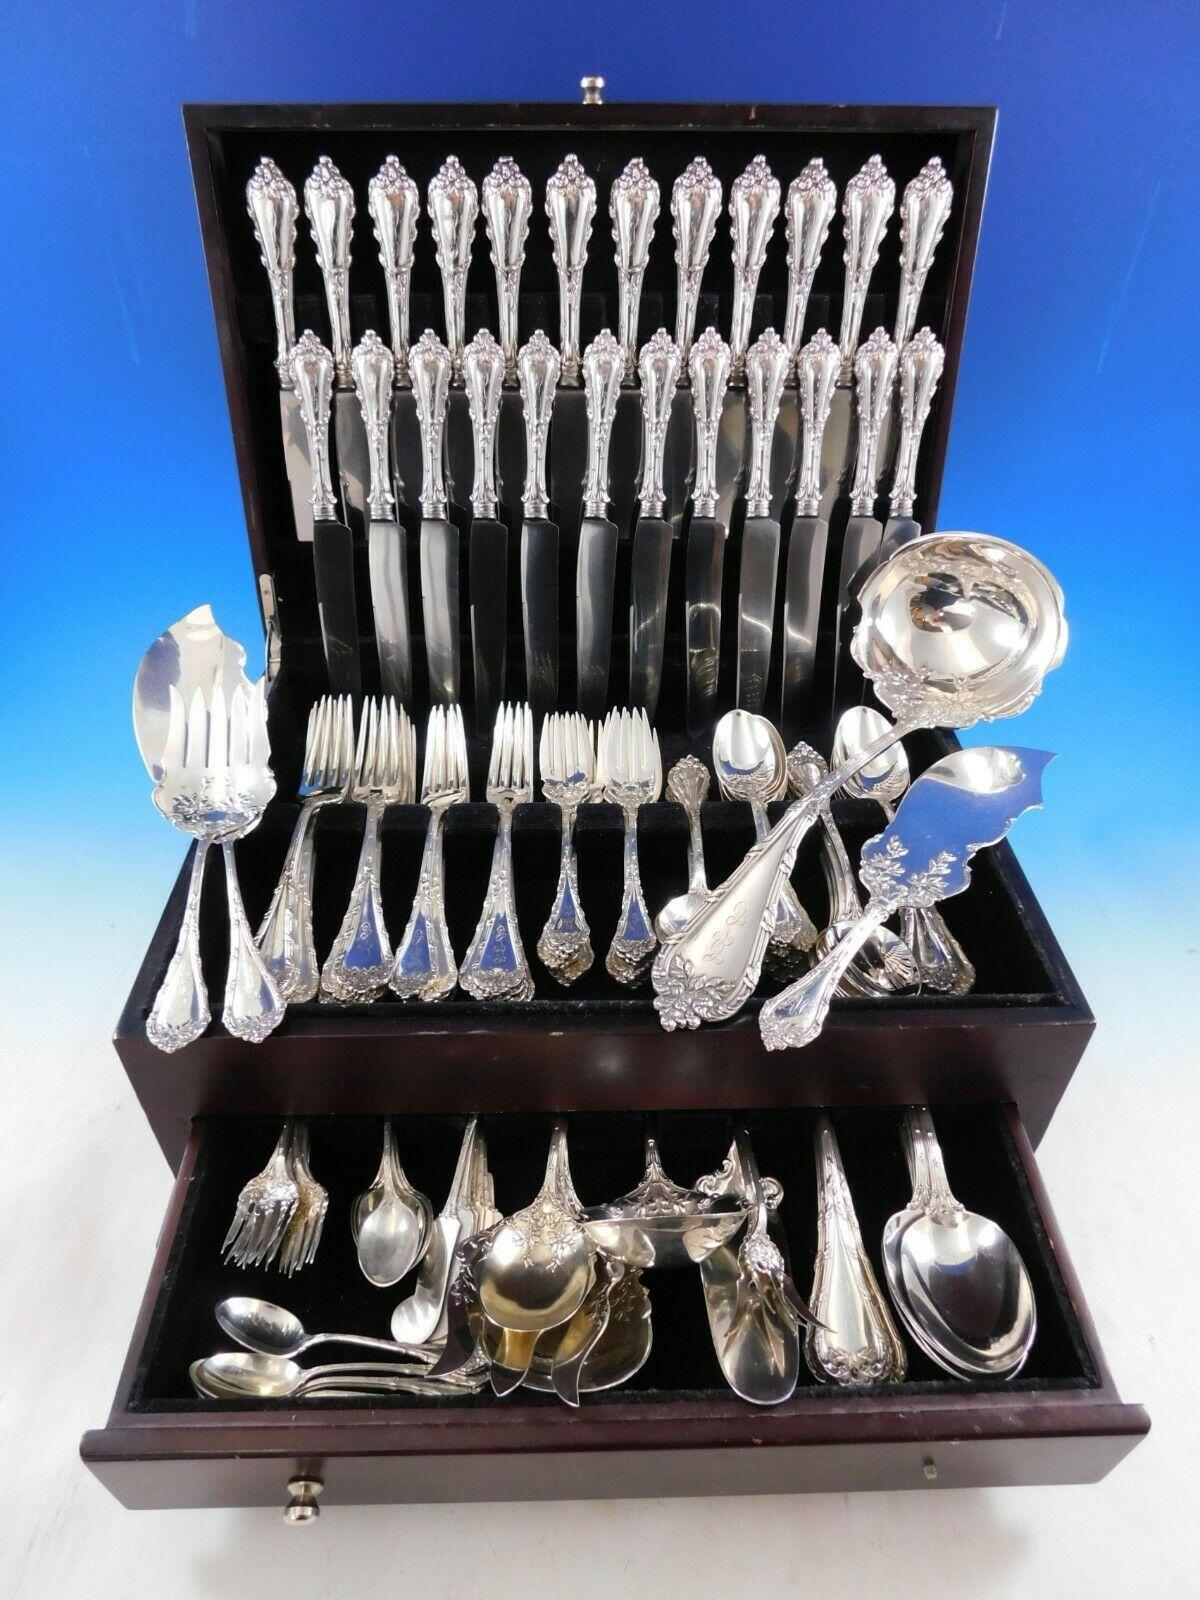 Monumental Madame Royale by Durgin sterling silver flatware set, 148 pieces. This set includes:

12 dinner size knives, 9 3/4